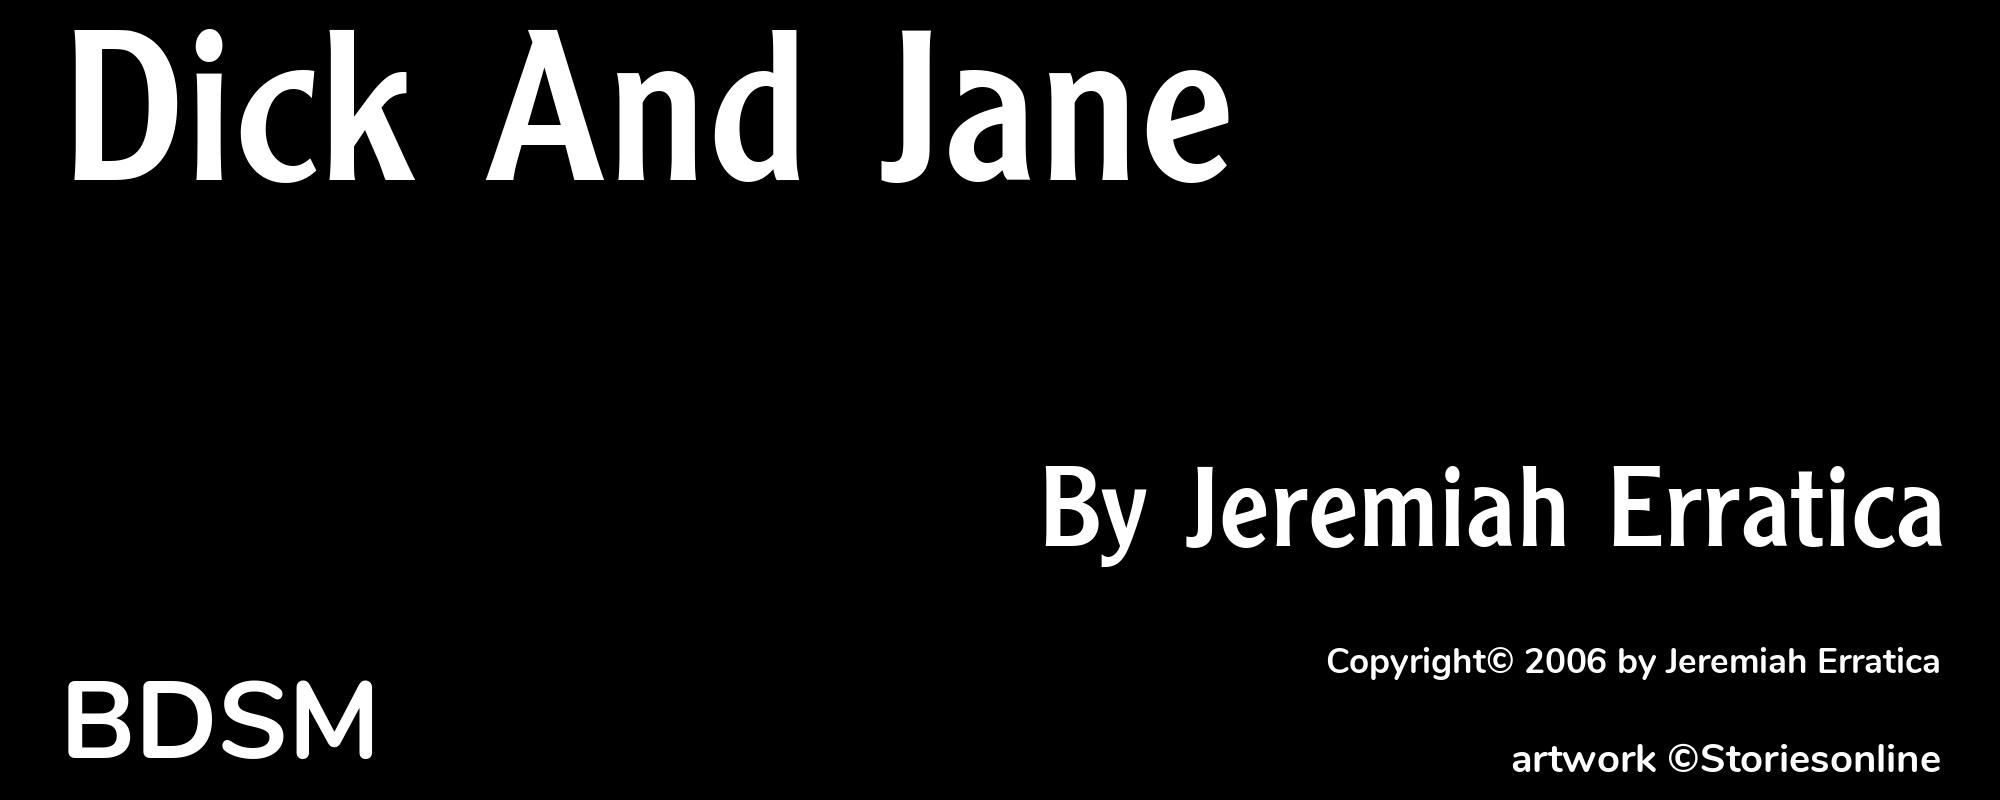 Dick And Jane - Cover